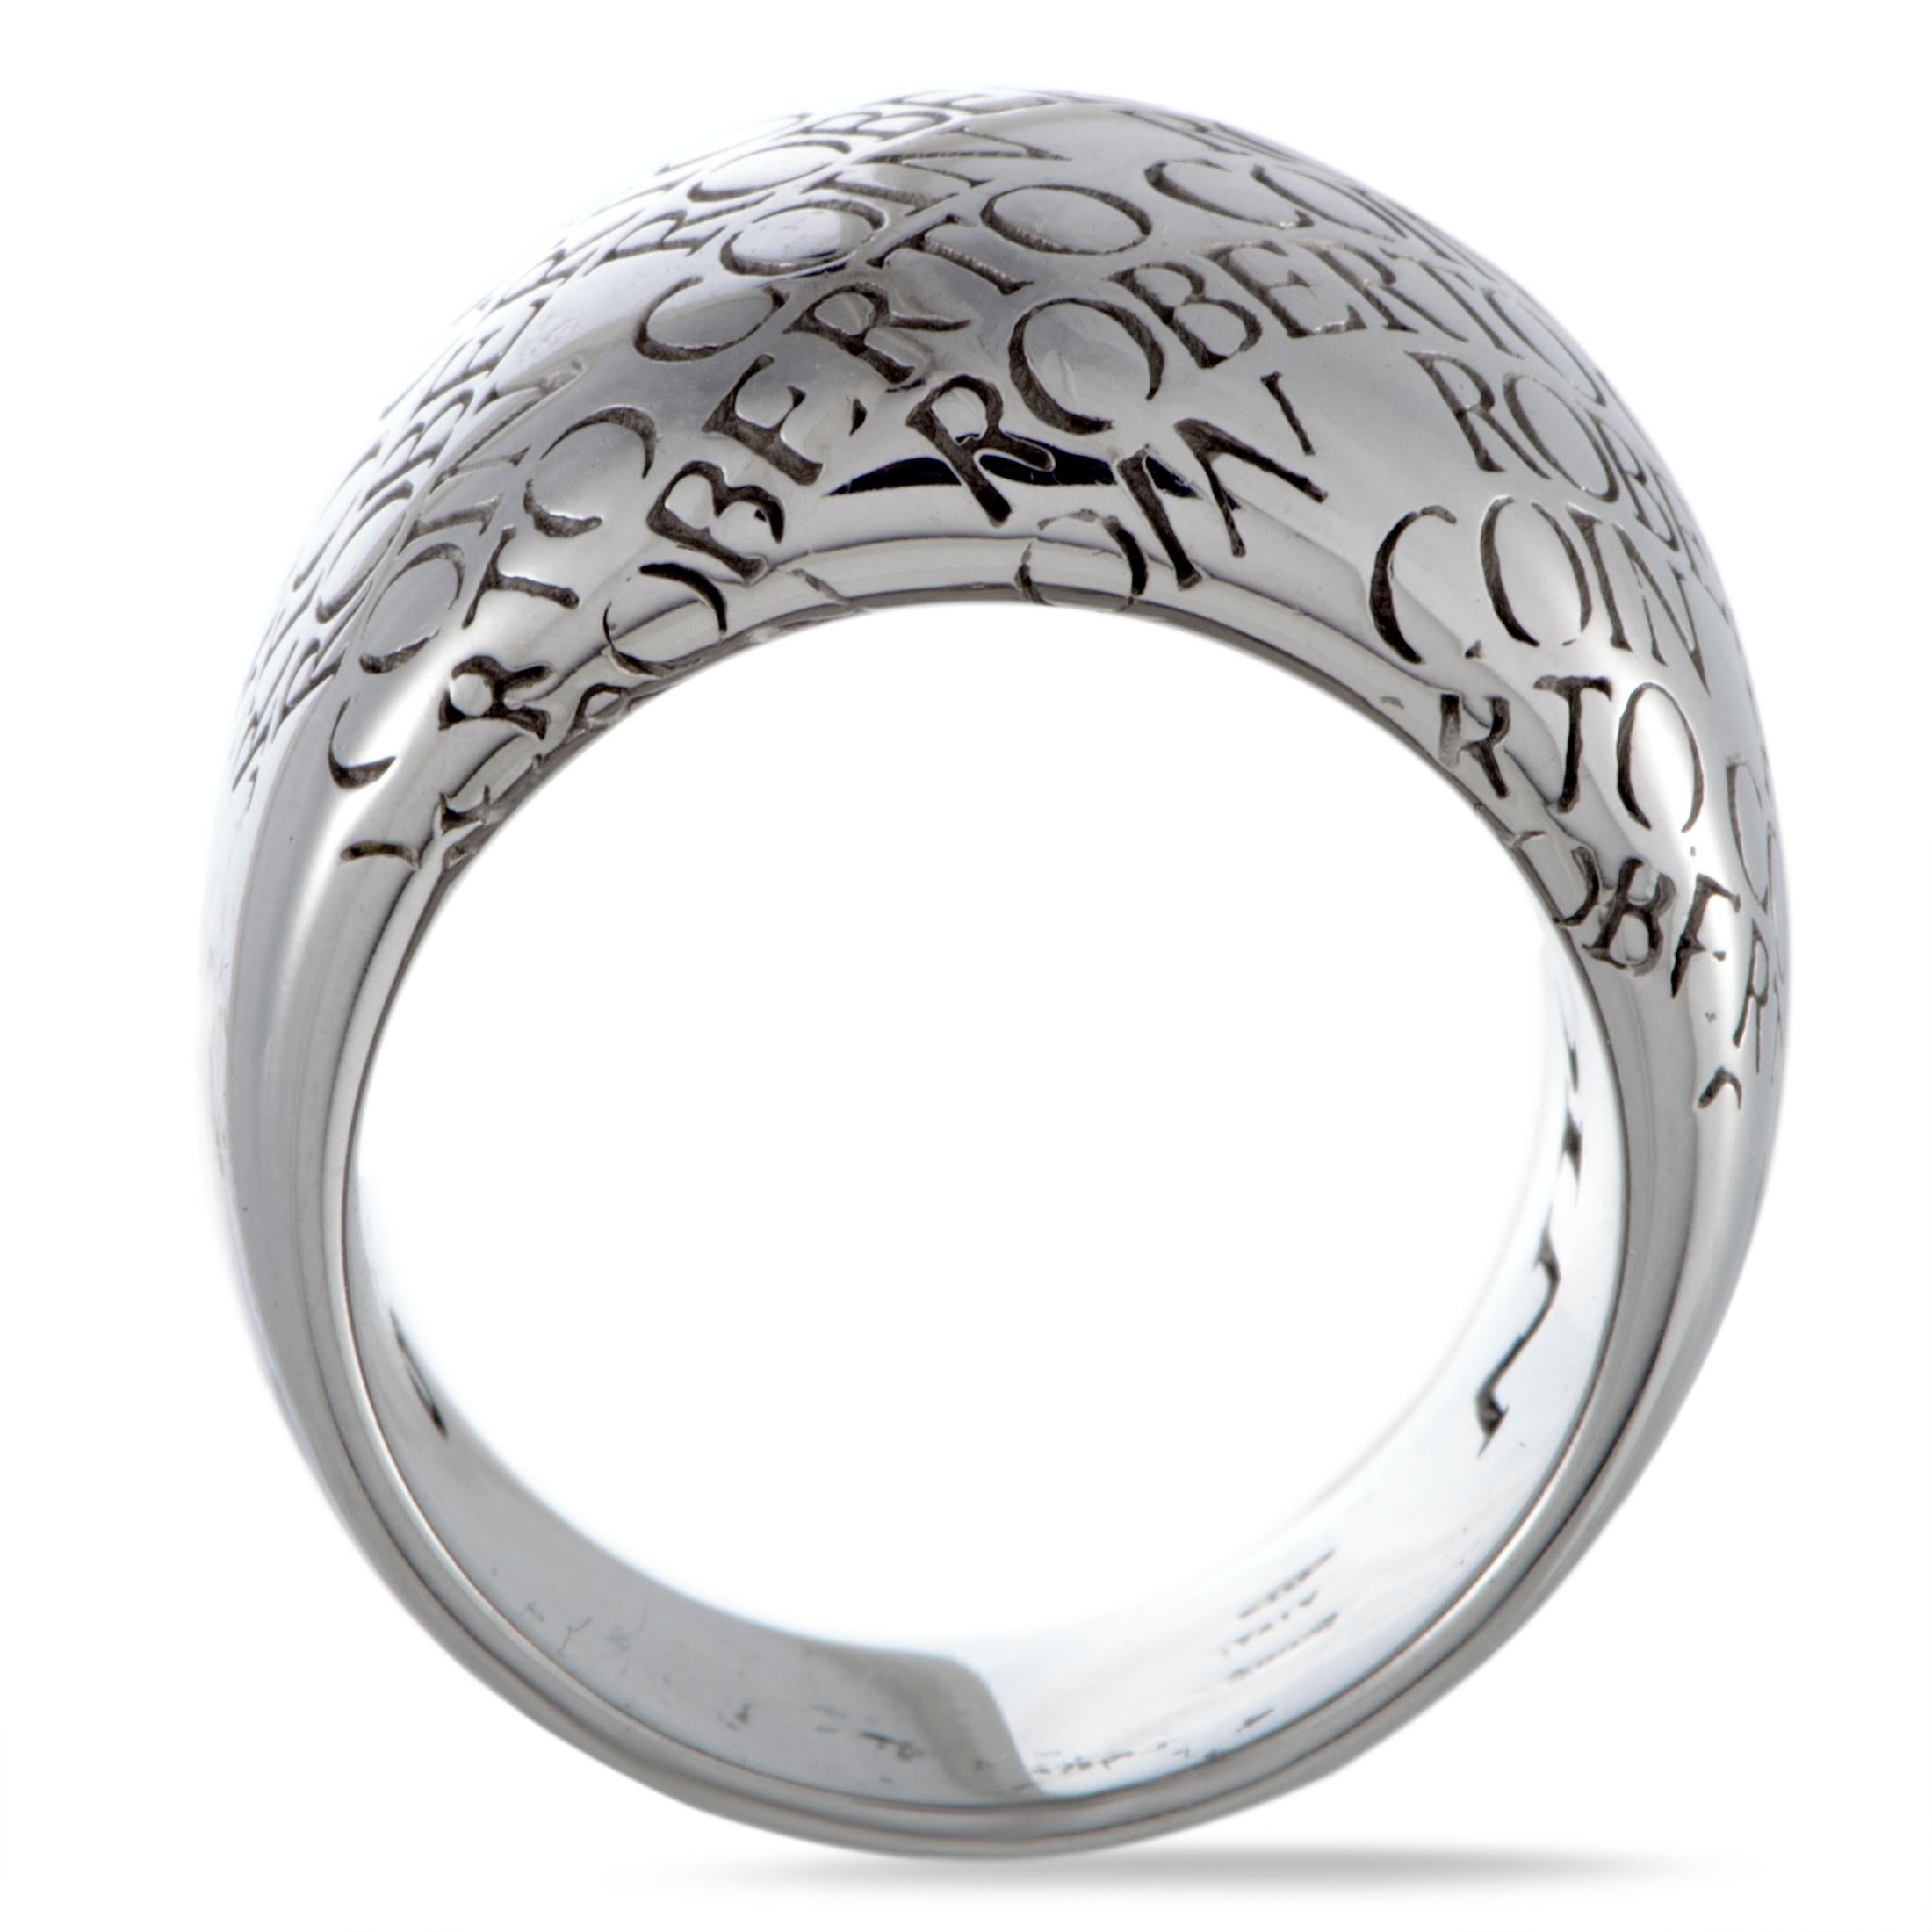 Standing out in glorious fashion against the splendidly bright and immaculately gleaming backdrop, the exceptionally neat and exquisitely carved inscriptions of the famous brand’s name produce an intriguing decorative pattern in this fantastic ring